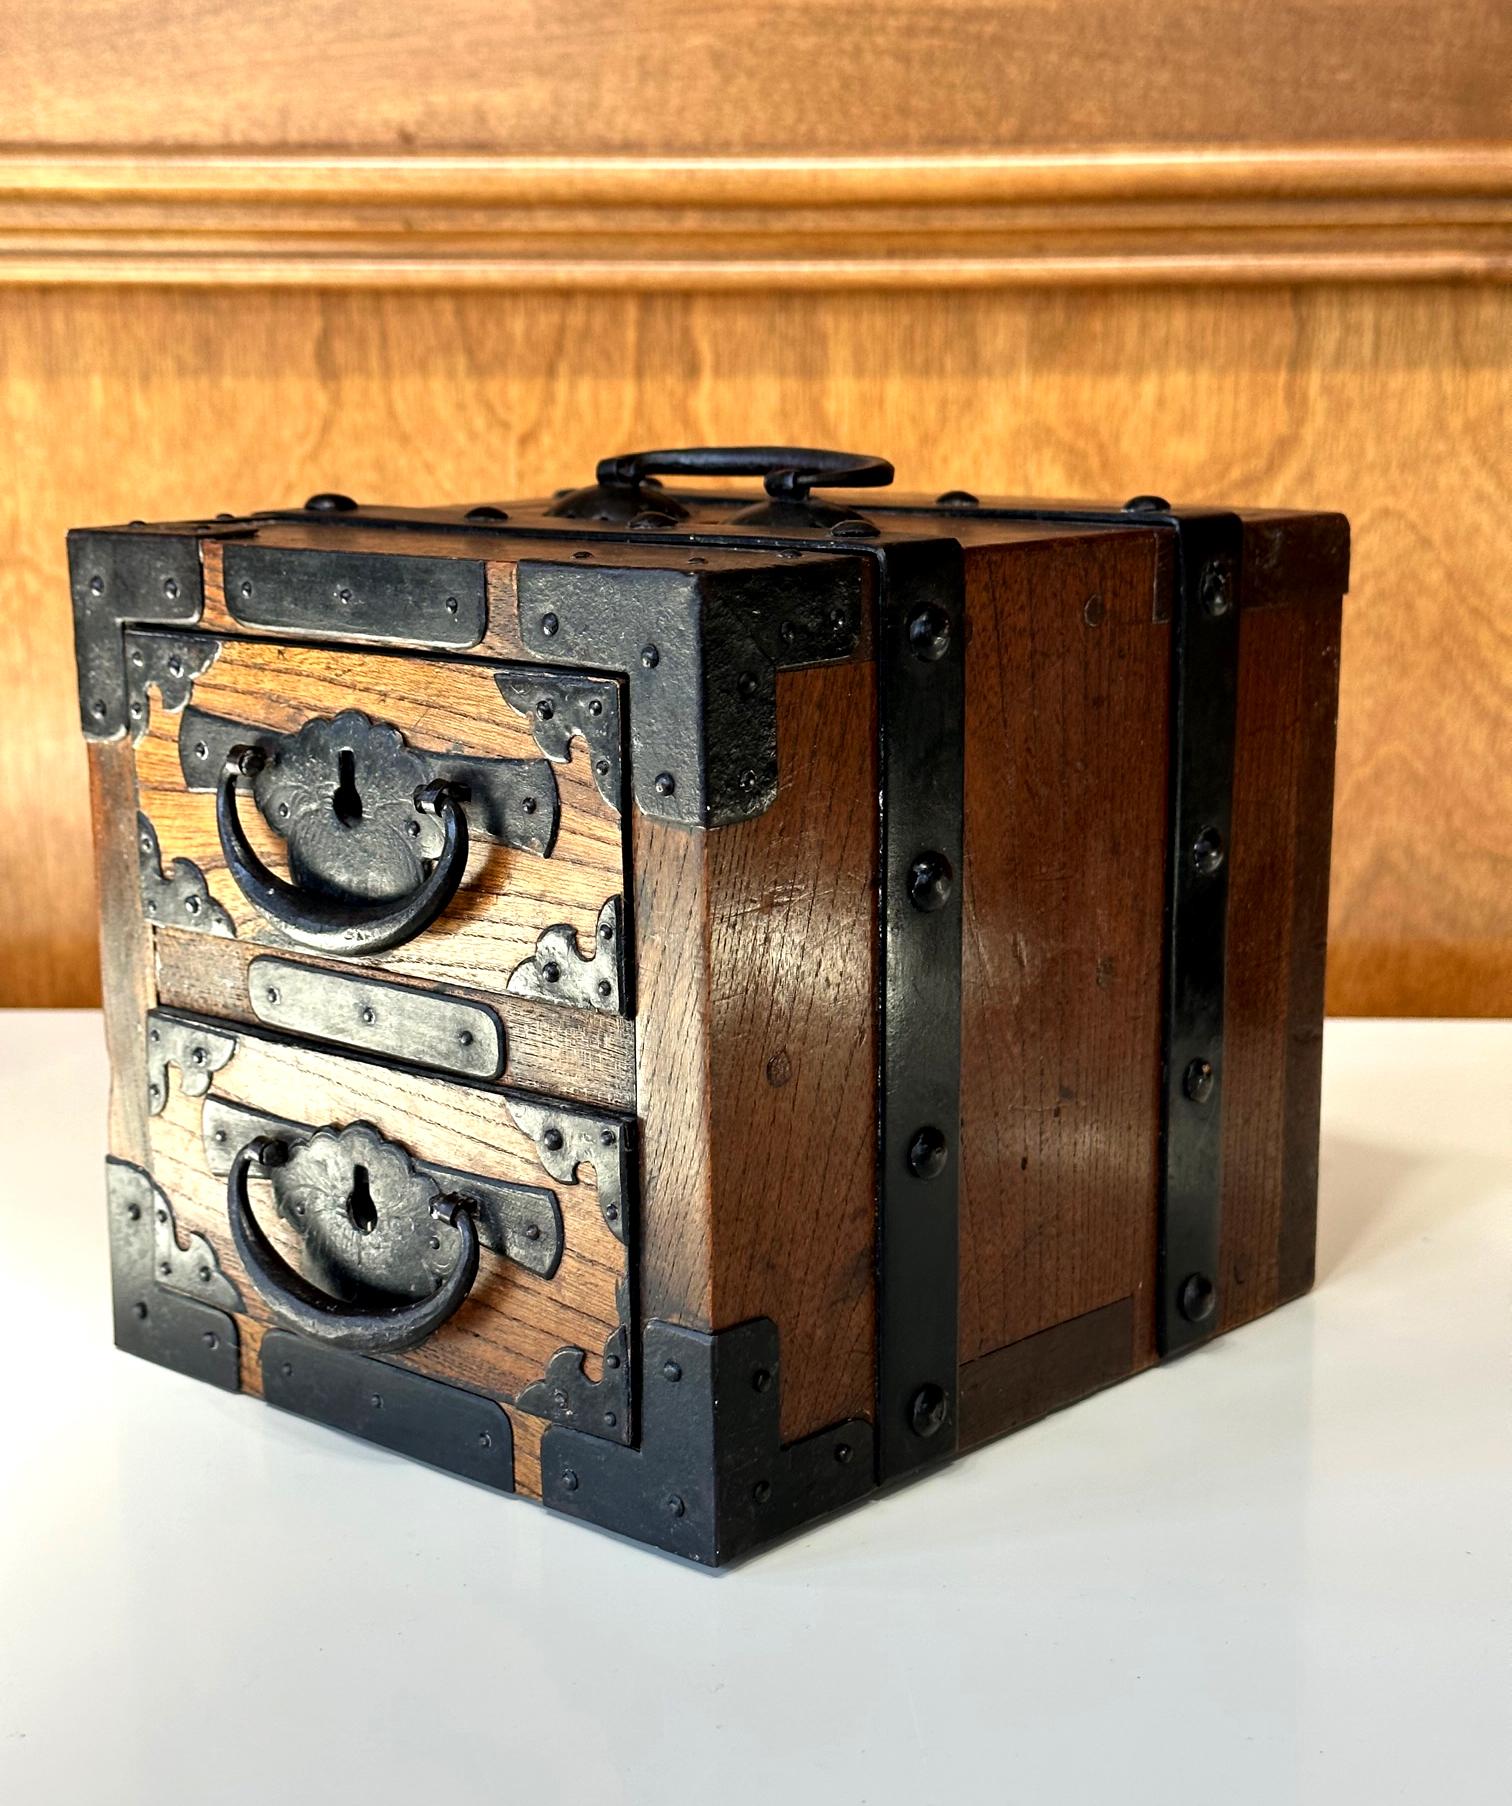 A small Japanese Zenibako (banker's money box) from early to mid-19th century circa late Edo Period. The chest was made from thick planks of a heavy hardwood with attractive grains and fitted with hand wrought iron hardware throughout. Made